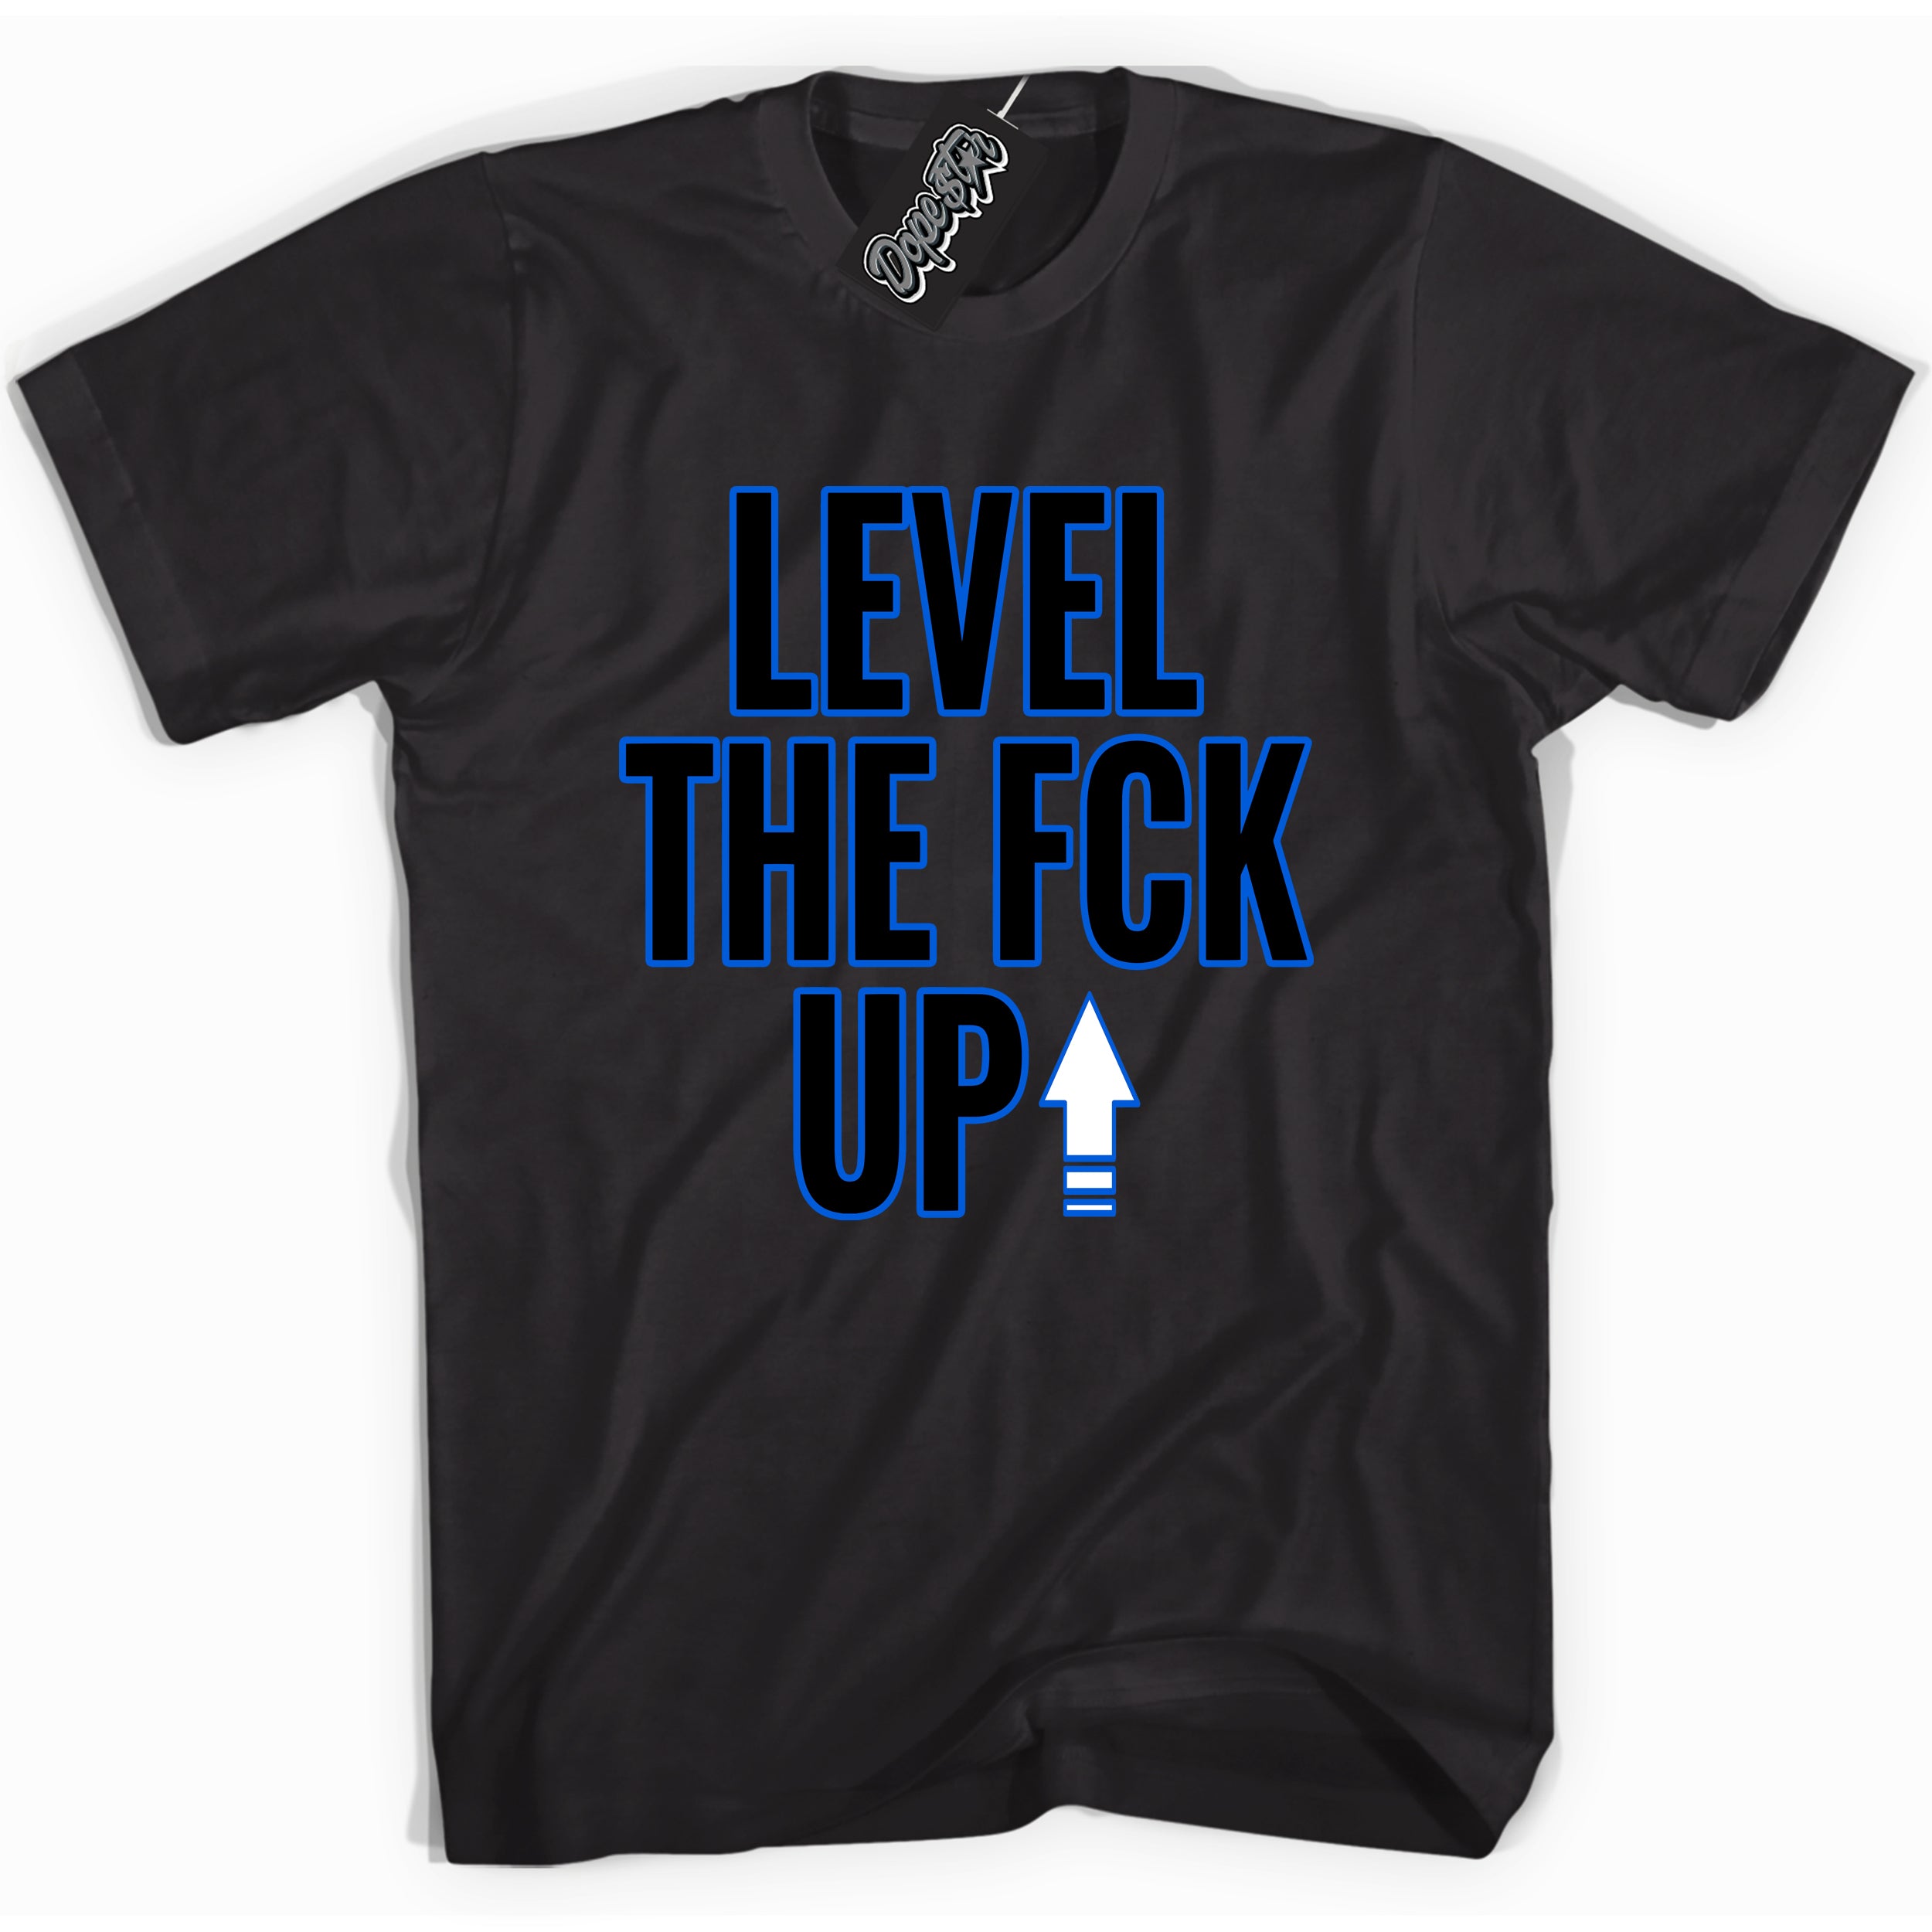 Cool Black graphic tee with "Level The Fck Up" design, that perfectly matches Royal Reimagined 1s sneakers 